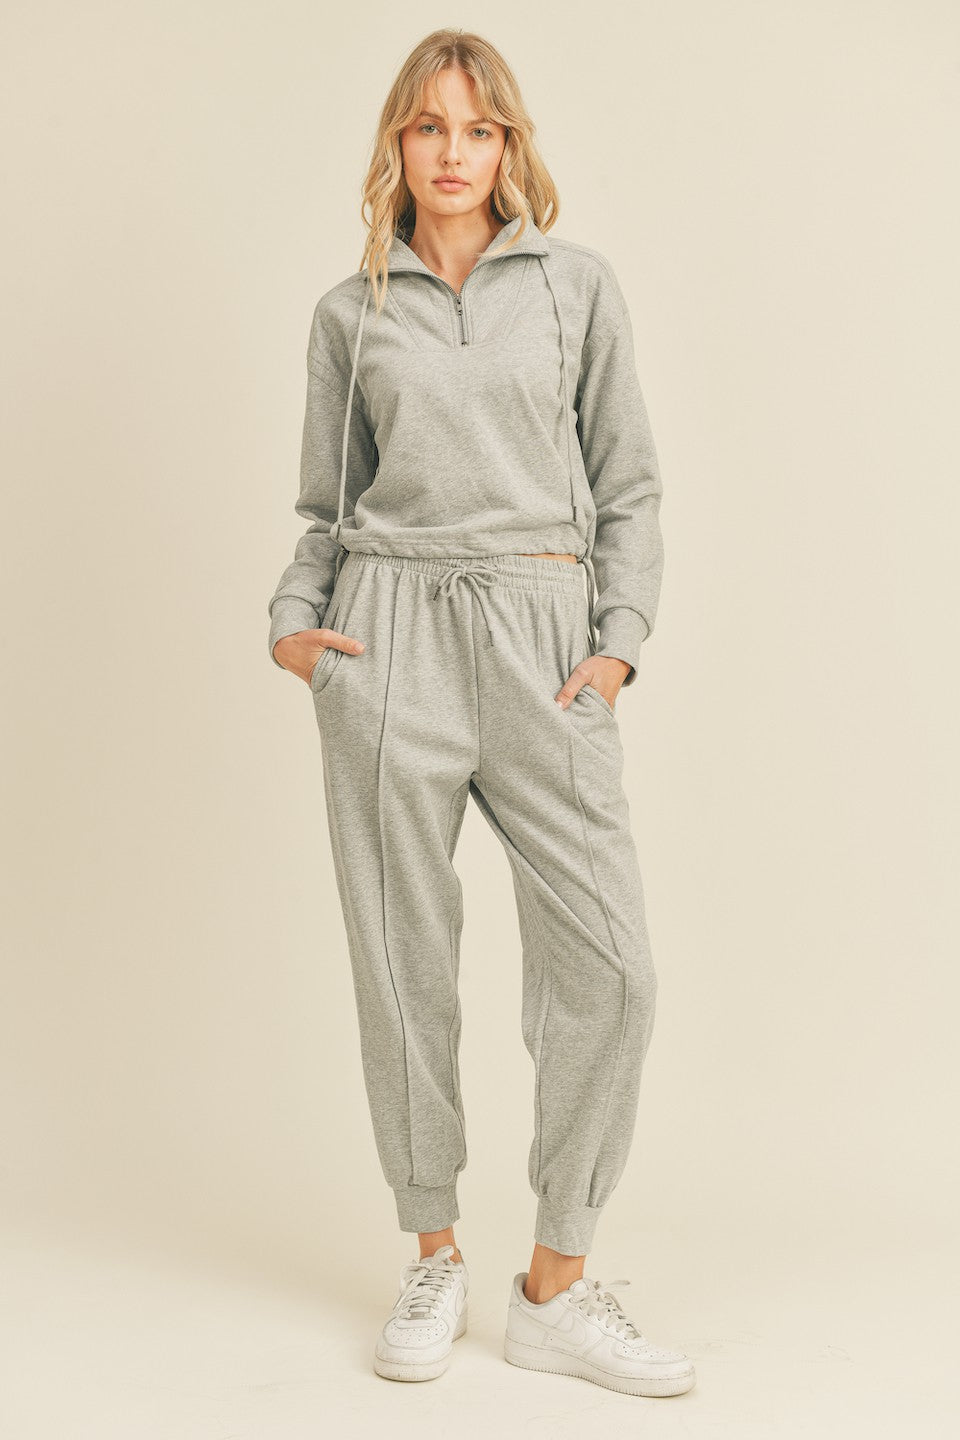 Heather Grey Tapered Lounge Bottom Introducing our new Heather Grey Tapered Lounge Bottoms! This lounge wear staple comes in a trendy tapered style with cuffed hem and drawstring waist, meant to give you an effortlessly stylish and comfortable look. Crafted with the utmost care from soft, premium fabrics, these bottoms are sure to be your go-to for days spent relaxing at home.